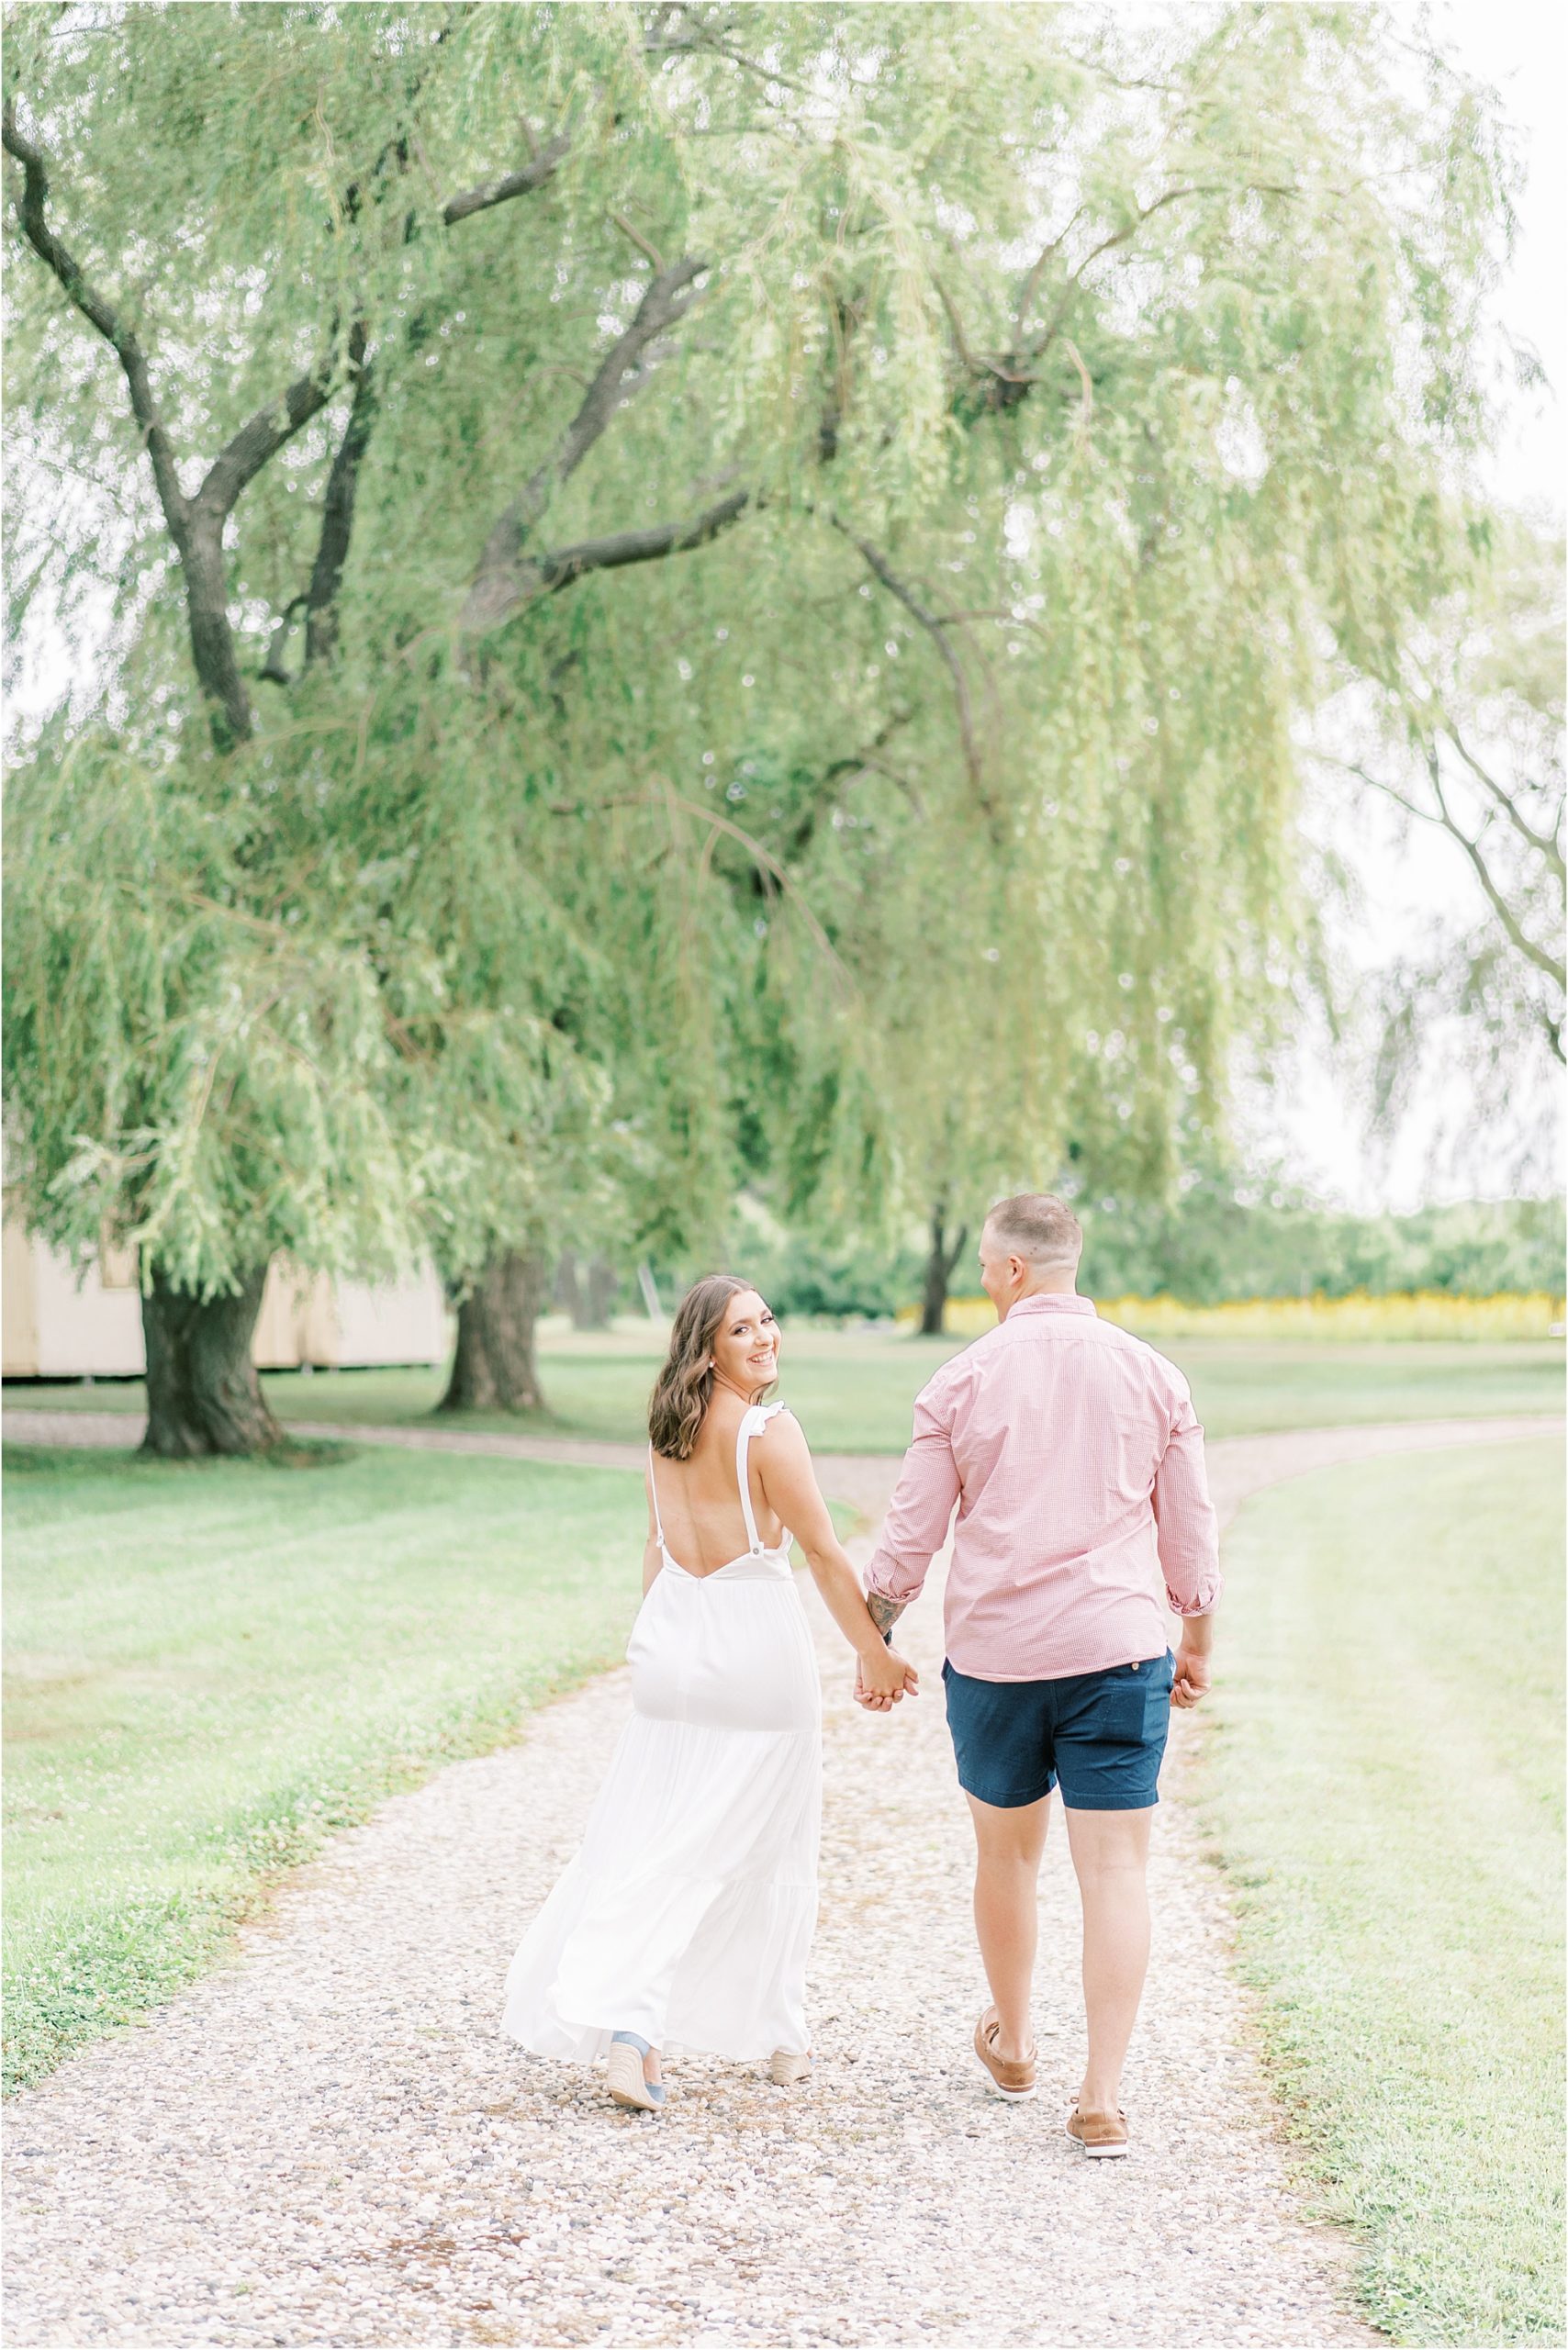 Couple engagement photos at Salt Air Farm holding hands and walking